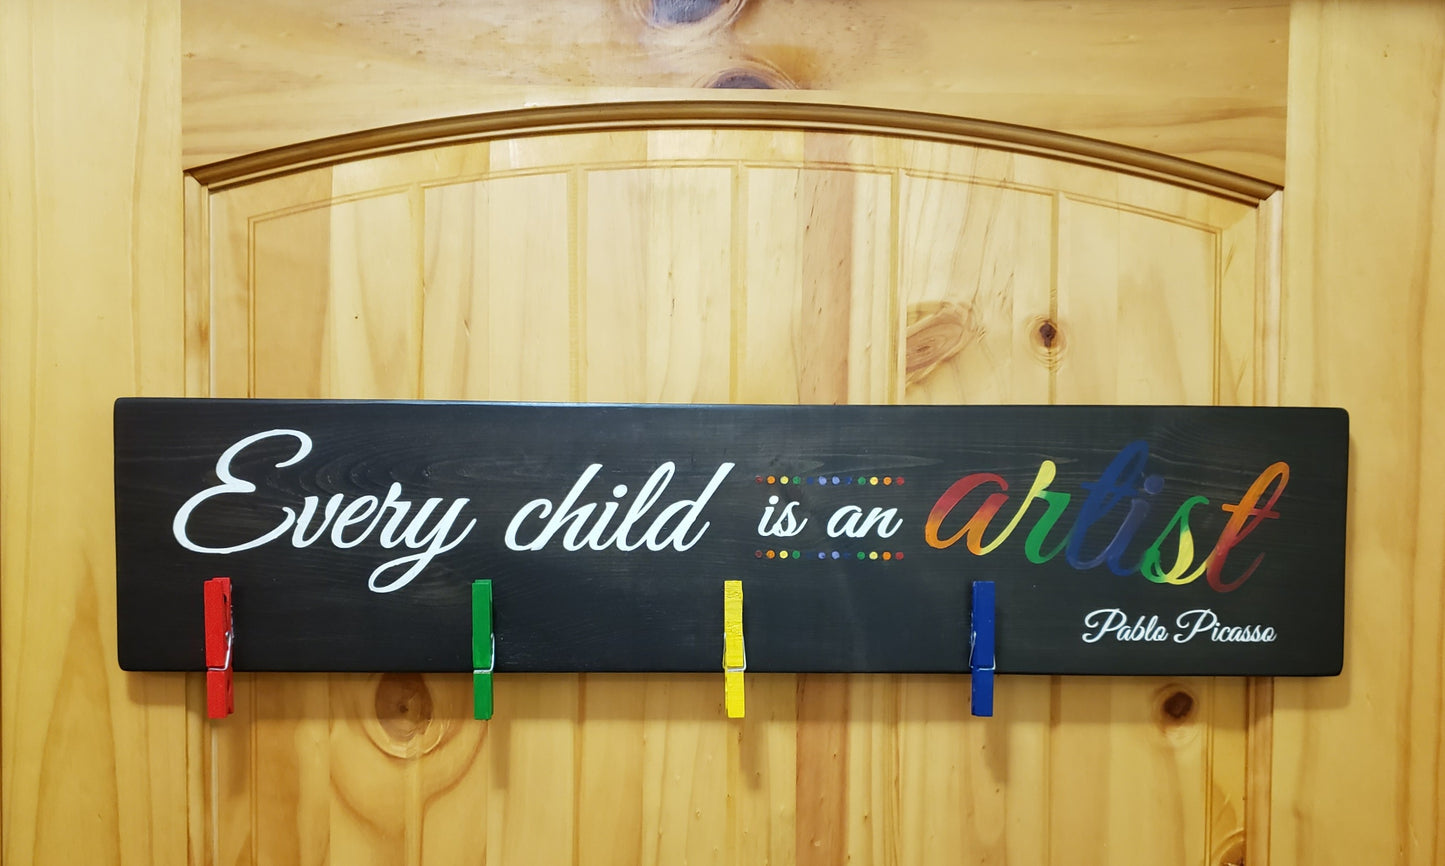 Child's Art Display - Every Child Is An Artist